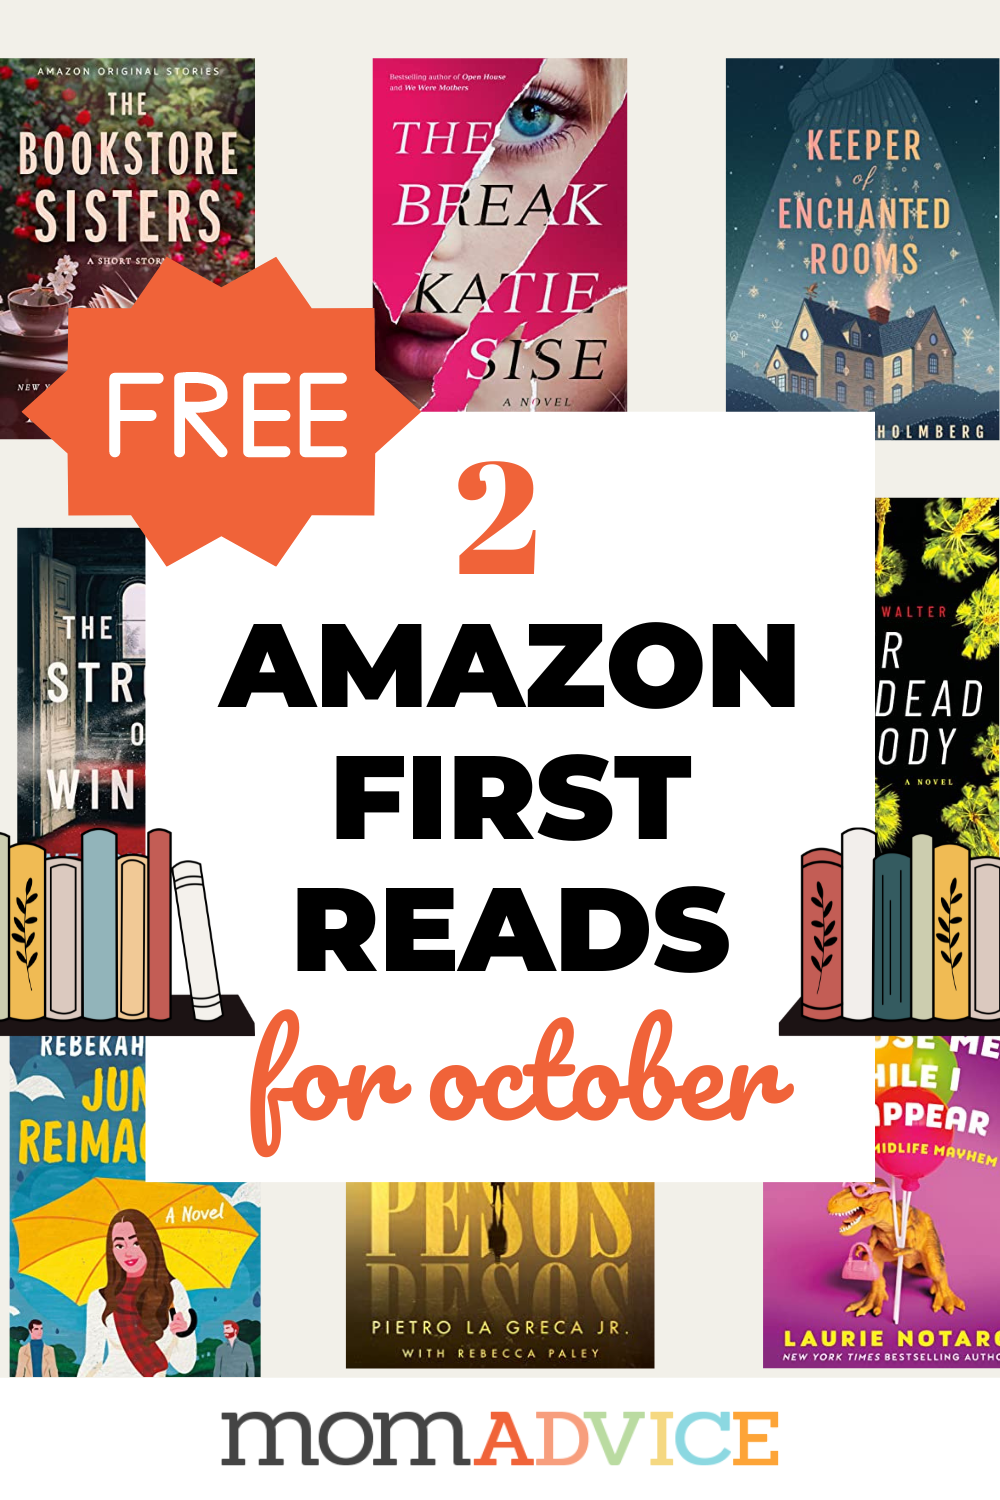 Amazon First Reads For October (Get 2 Free Books)